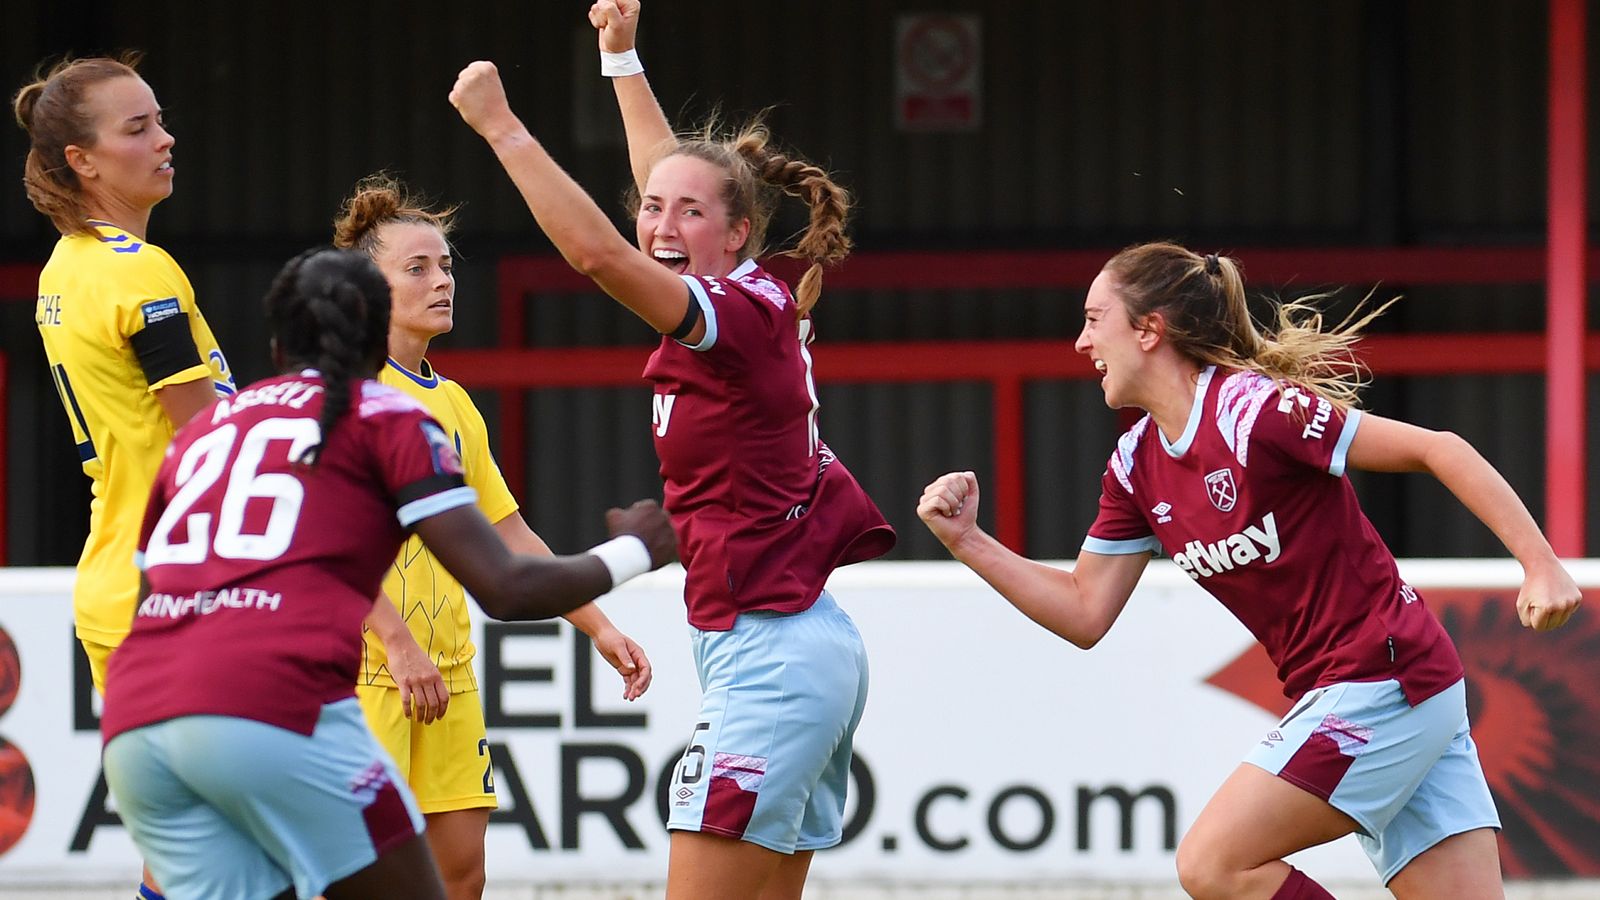 Wsl Aston Villa Shock Manchester City While Tottenham And West Ham Claim Wins On Opening